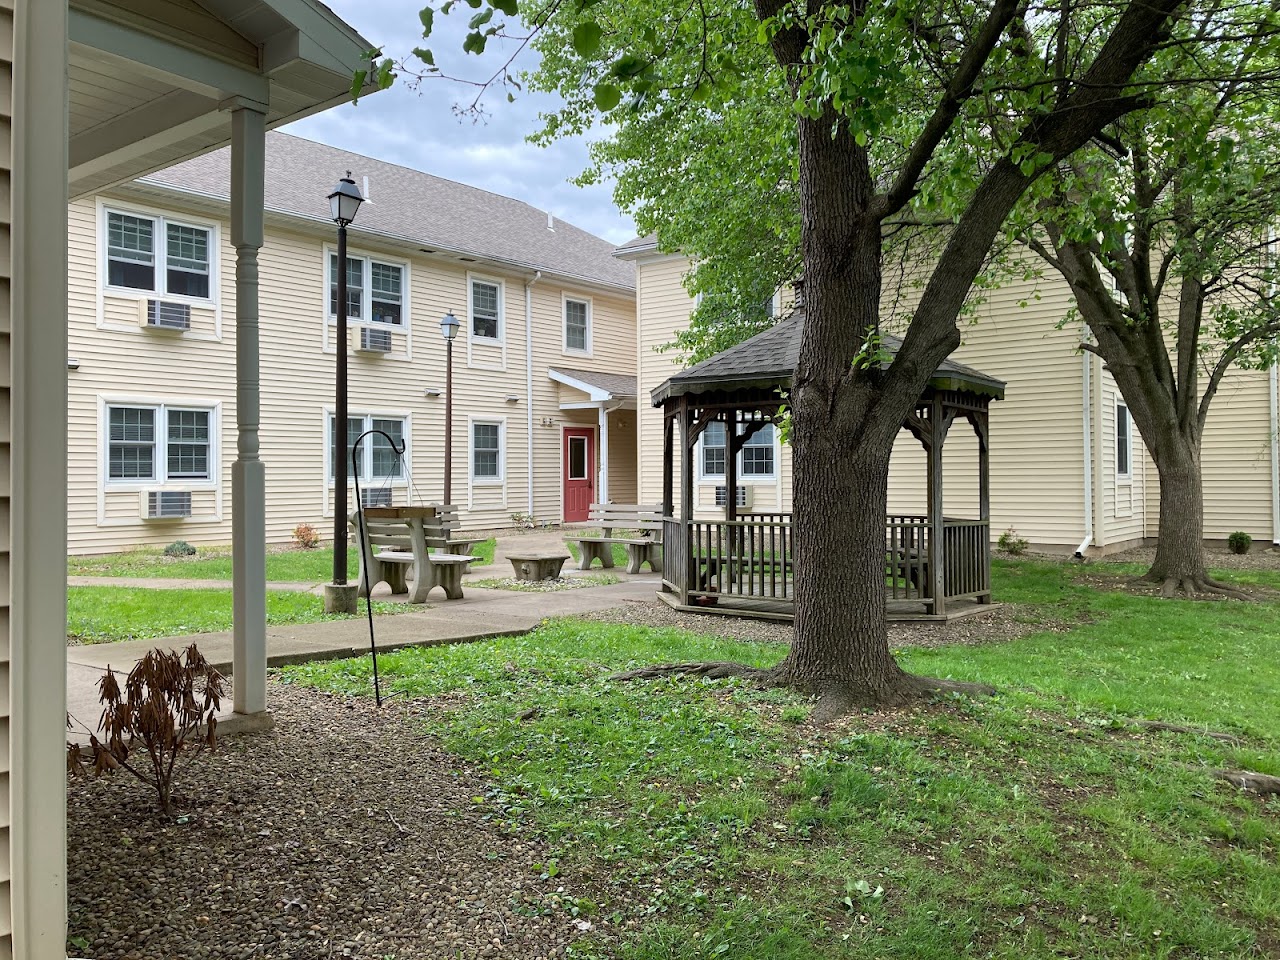 Photo of ANTHONY COURT at 345 IRON ST BLOOMSBURG, PA 17815